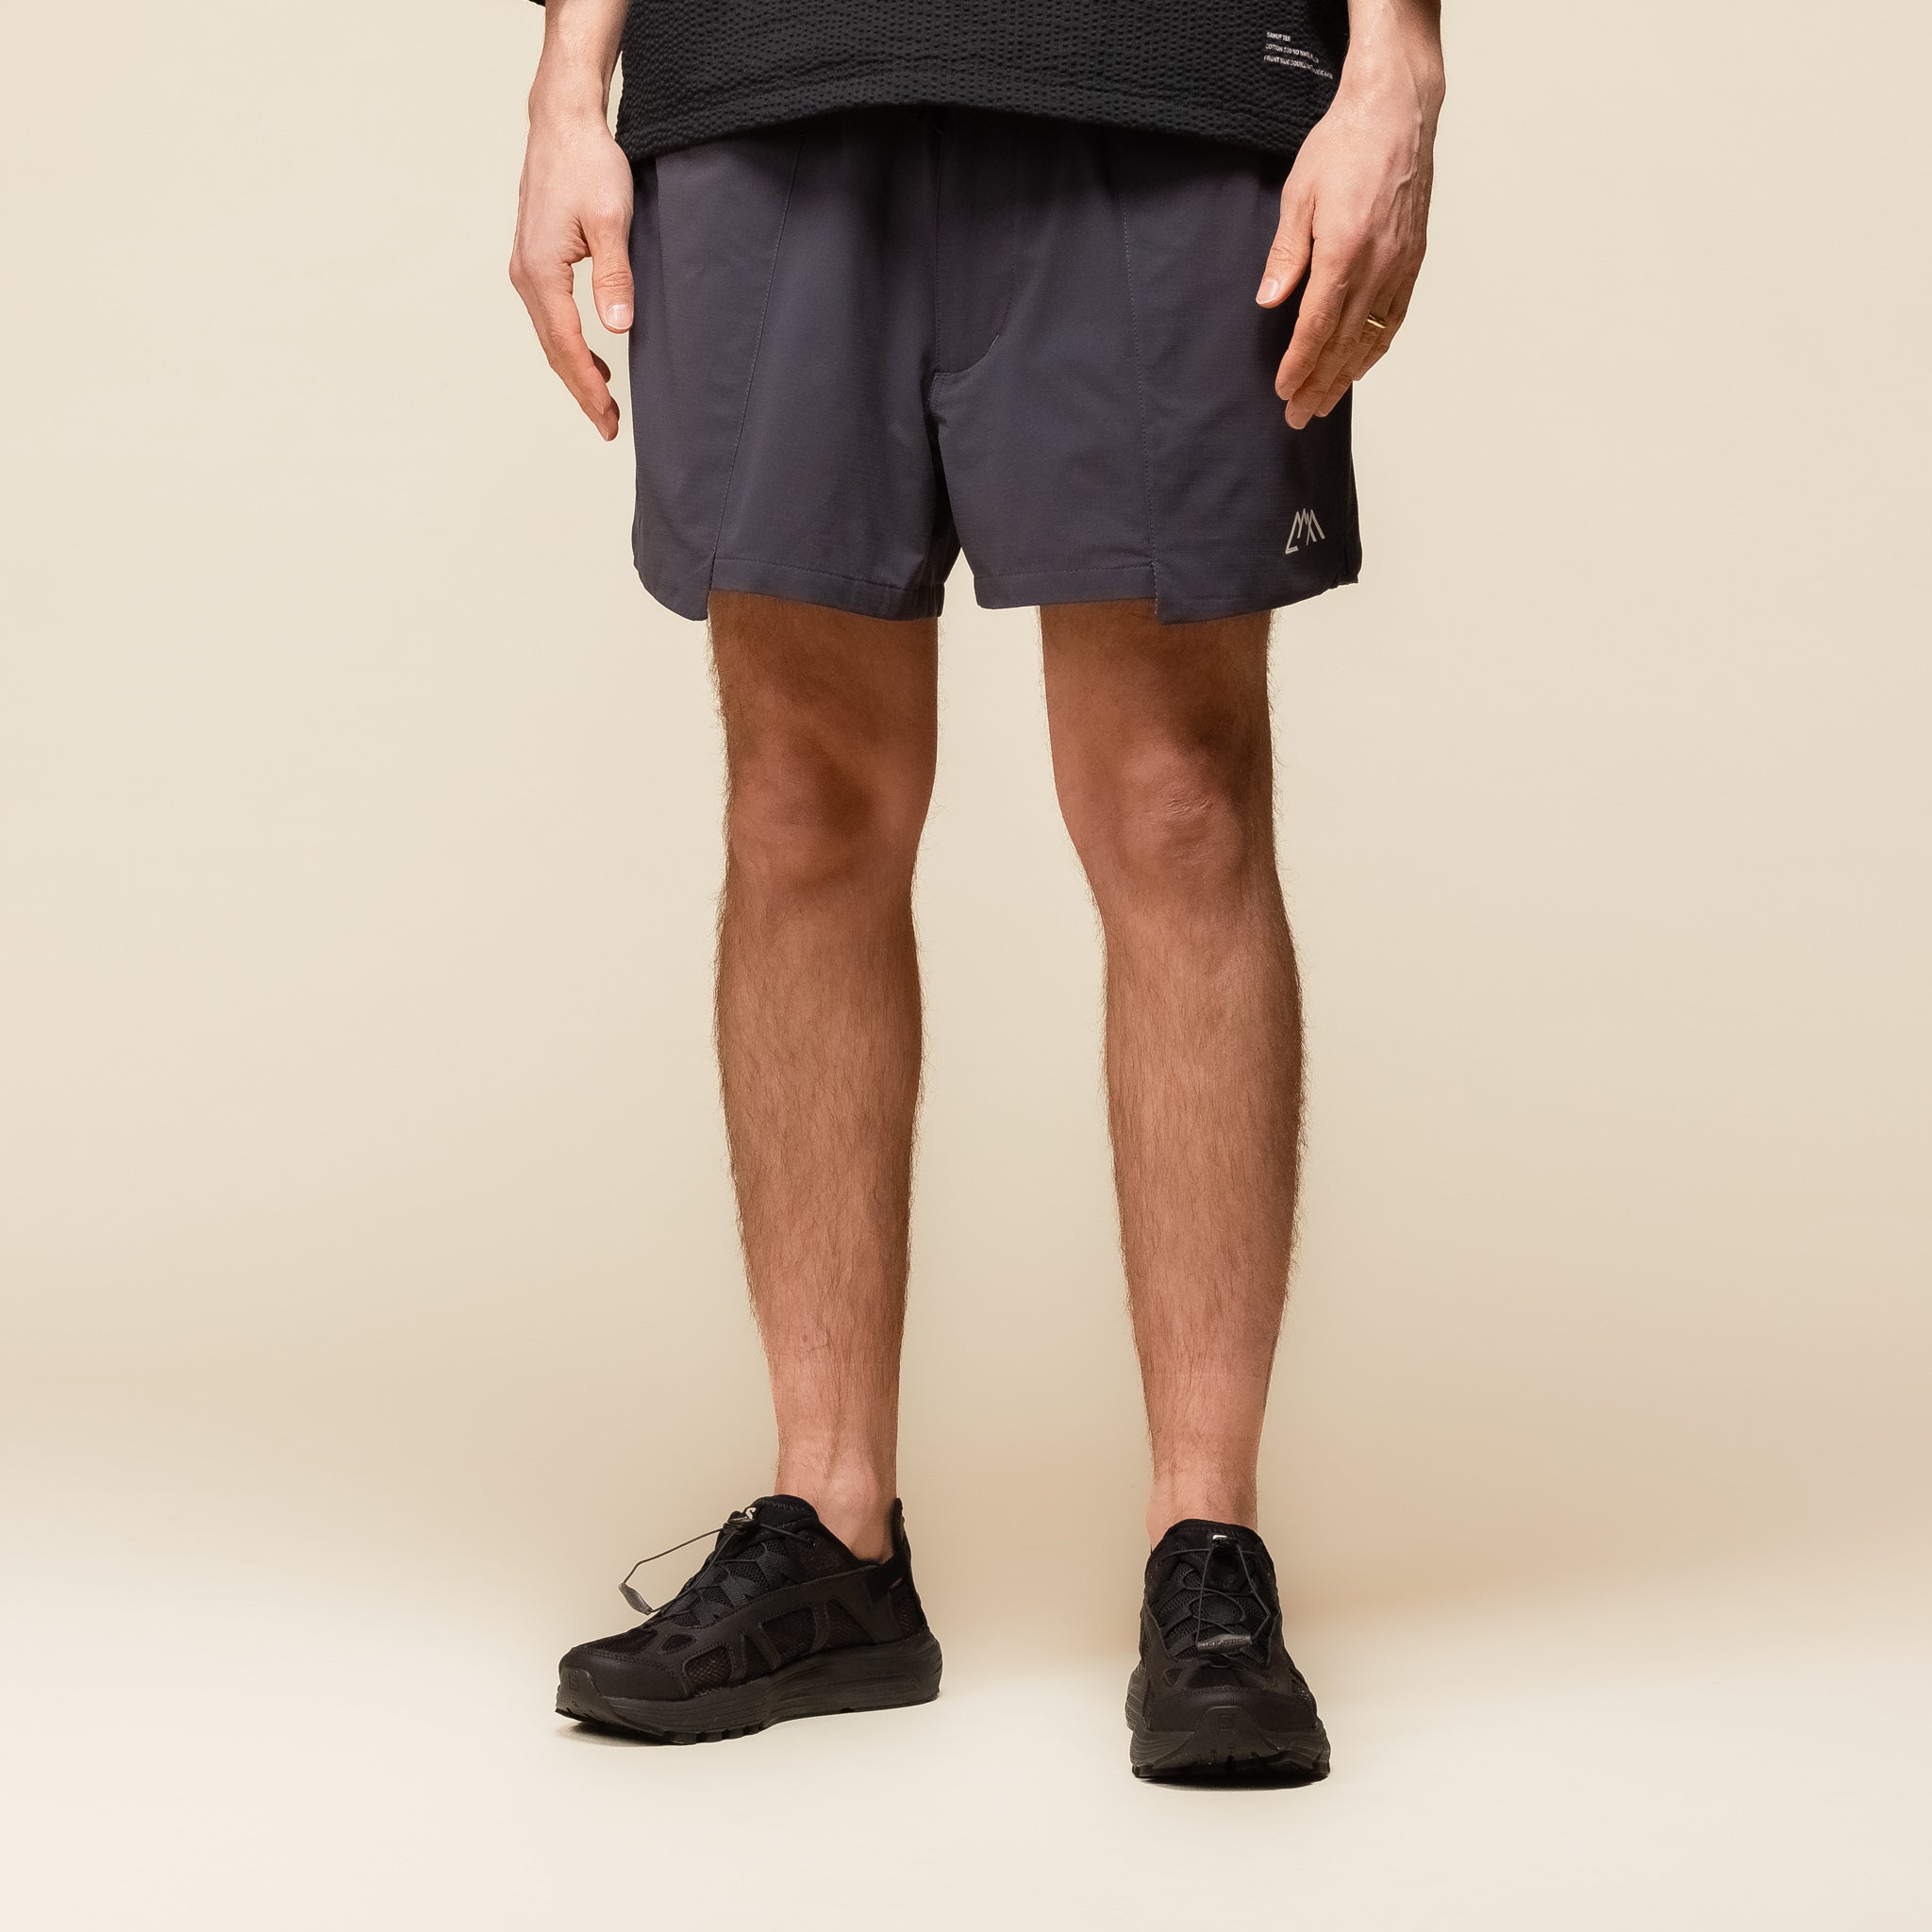 CMF Outdoor Garment - New Bug Shorts - Charcoal